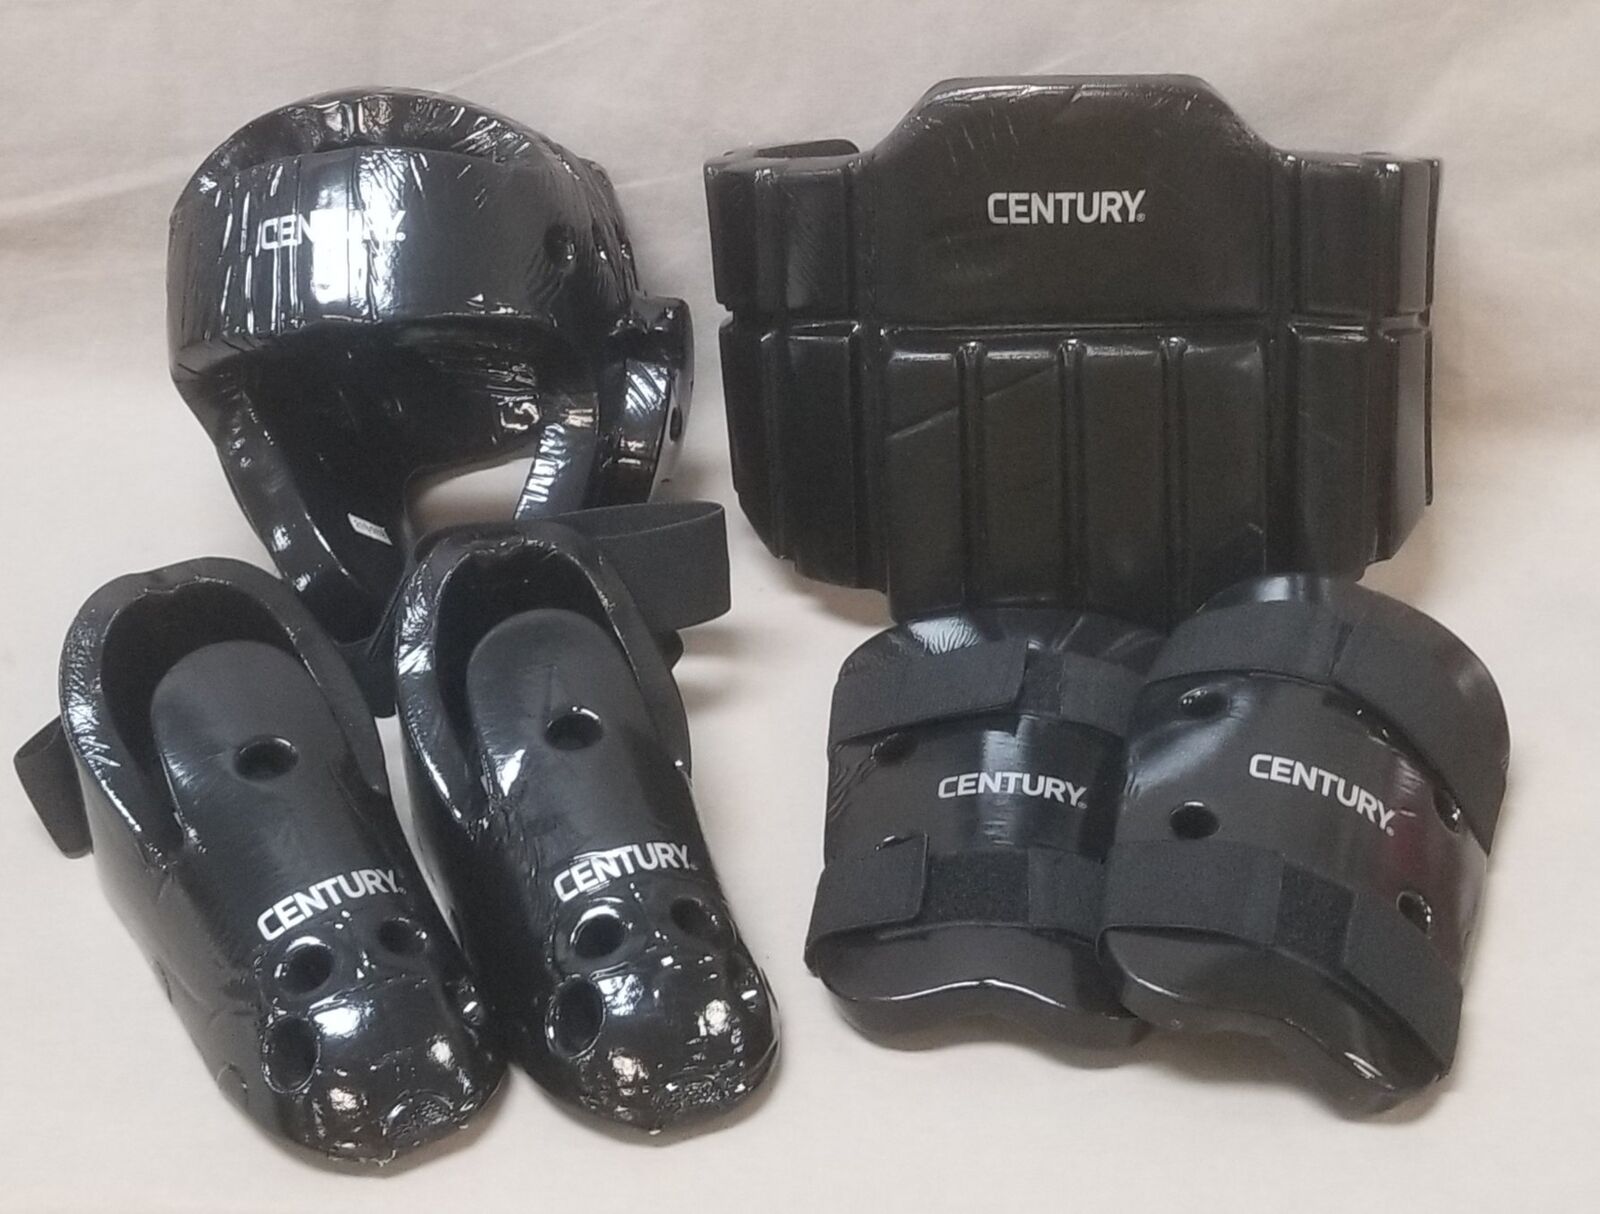 CENTURY Karate Youth Child Sparring Gear Equipment 6 Pieces